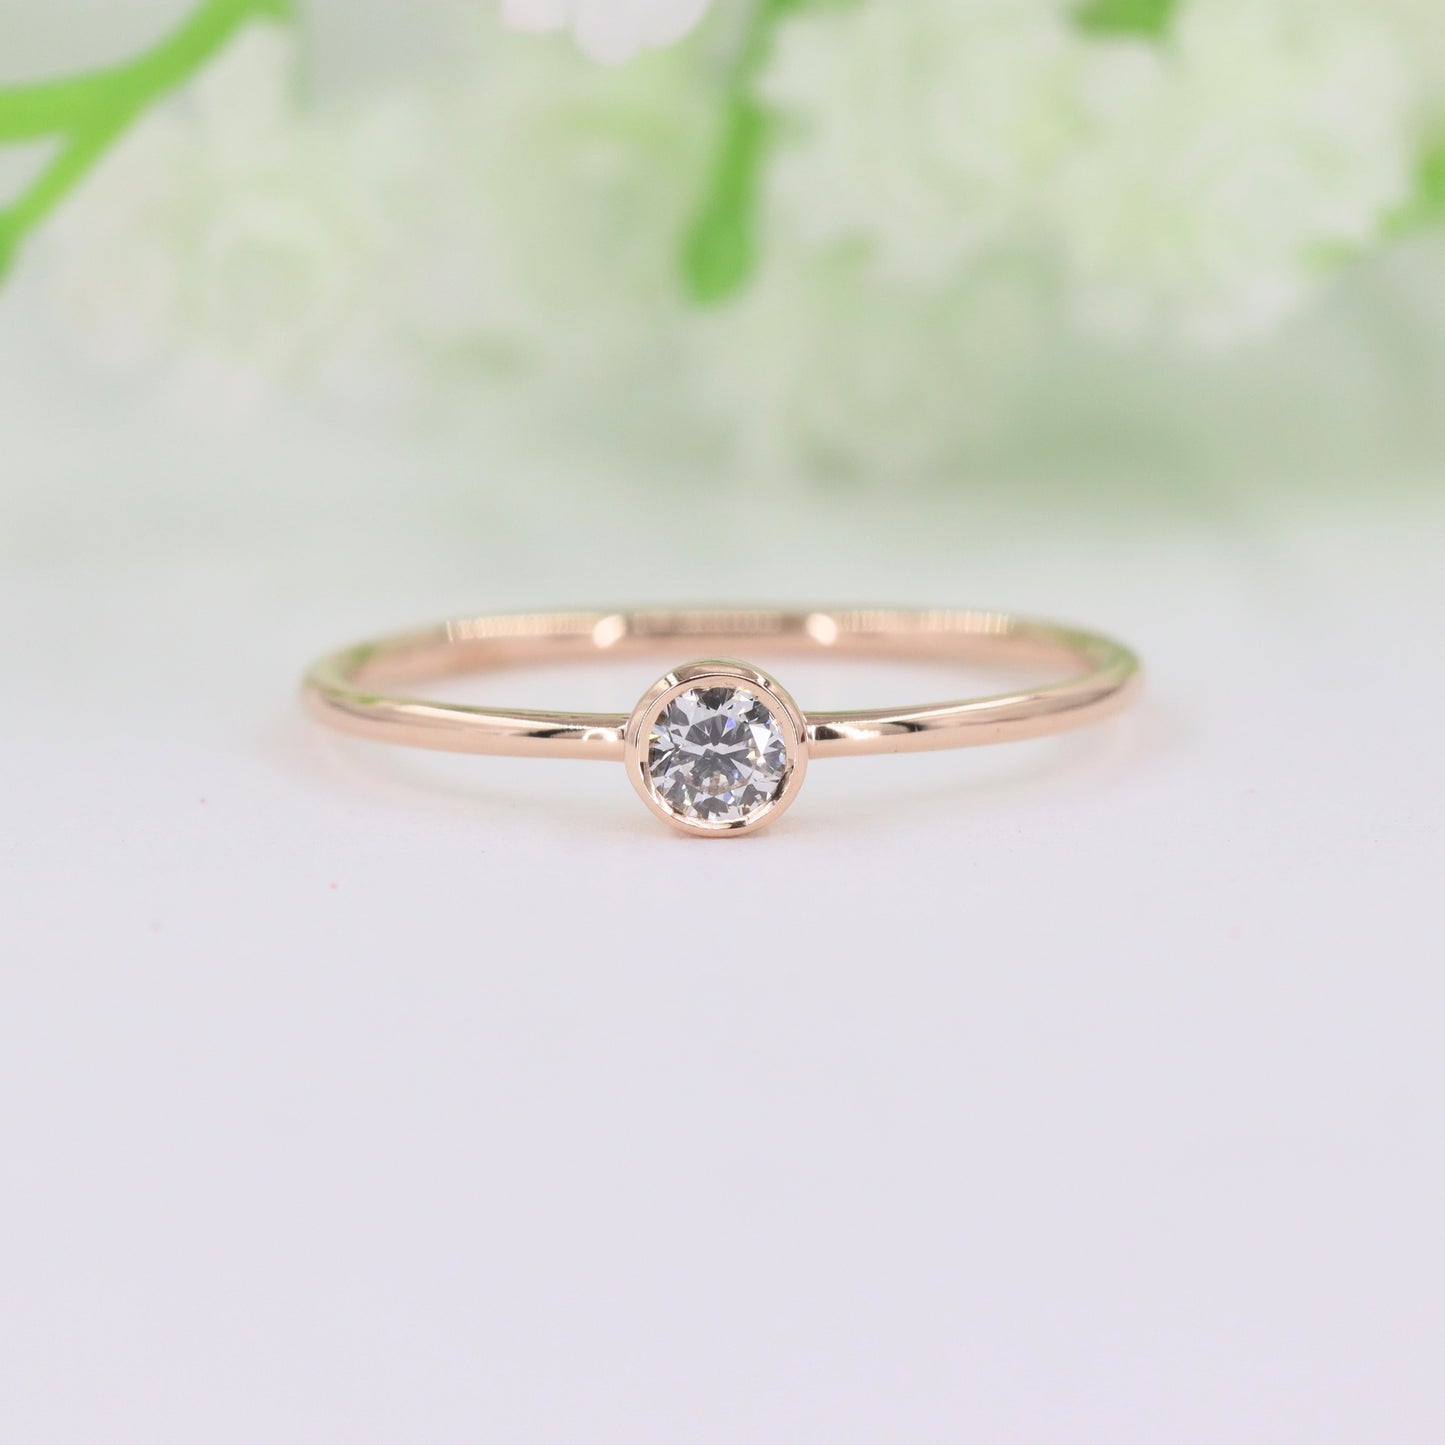 14K gold Straight Bezel .07ct Diamond Stackable Ring/ Dainty Ring/ Simple Engagement Ring/ Single Diamond Wedding Ring/Gift for her